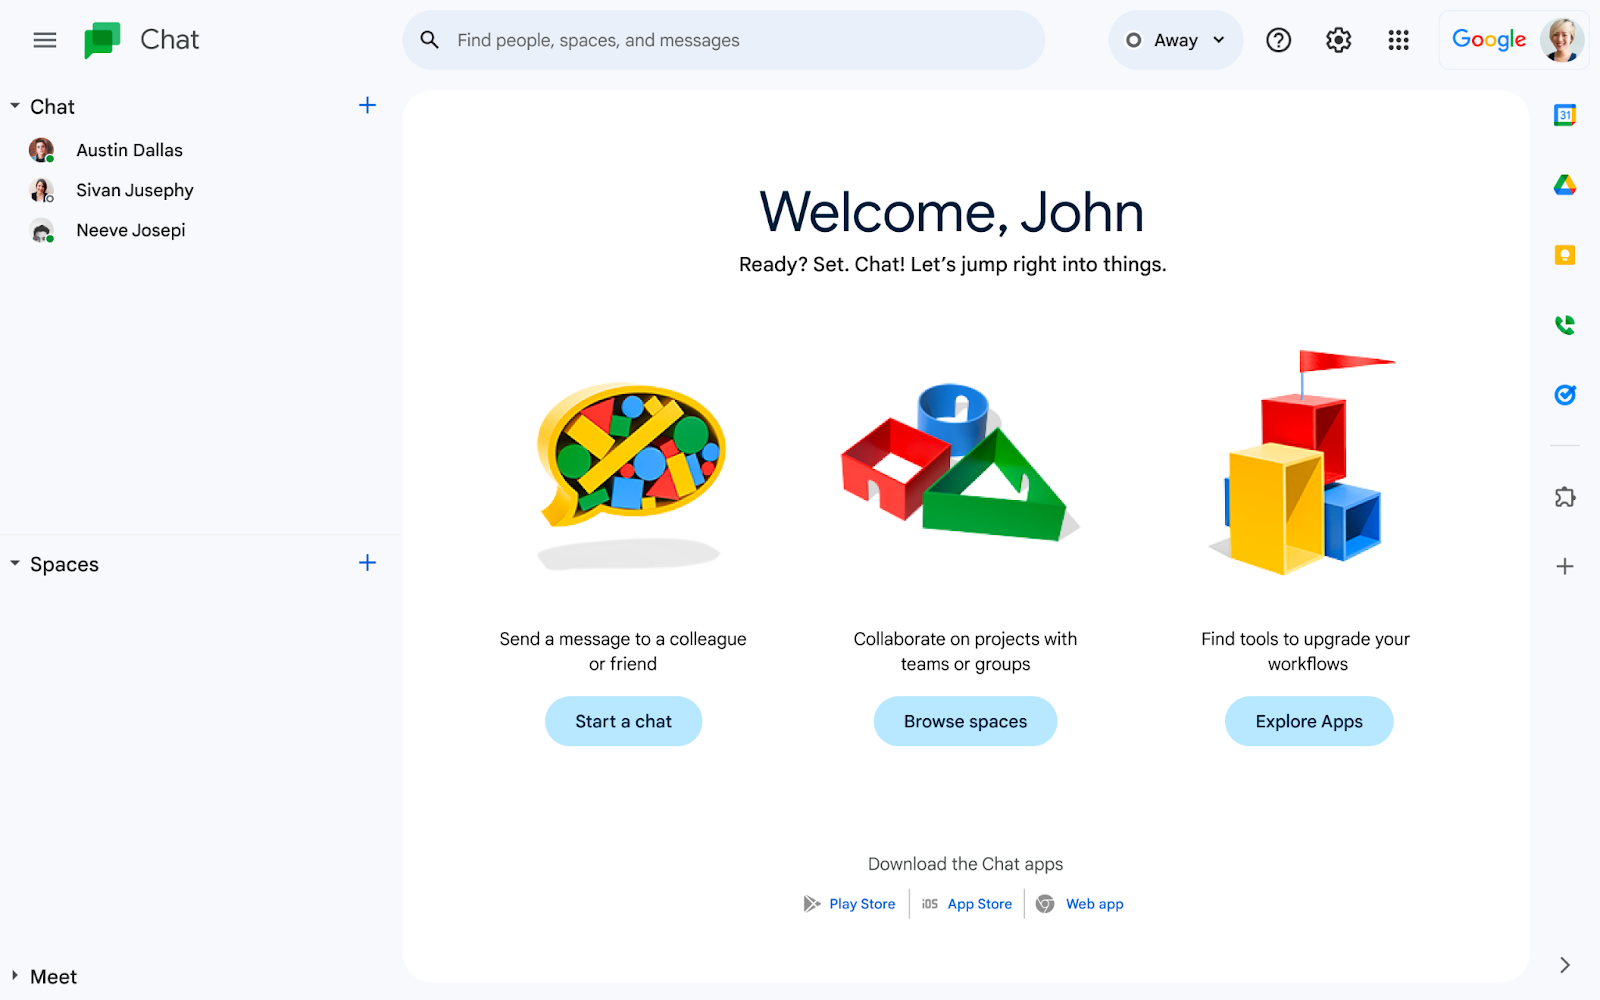 Google Workspace Updates: New Google Groups now generally available